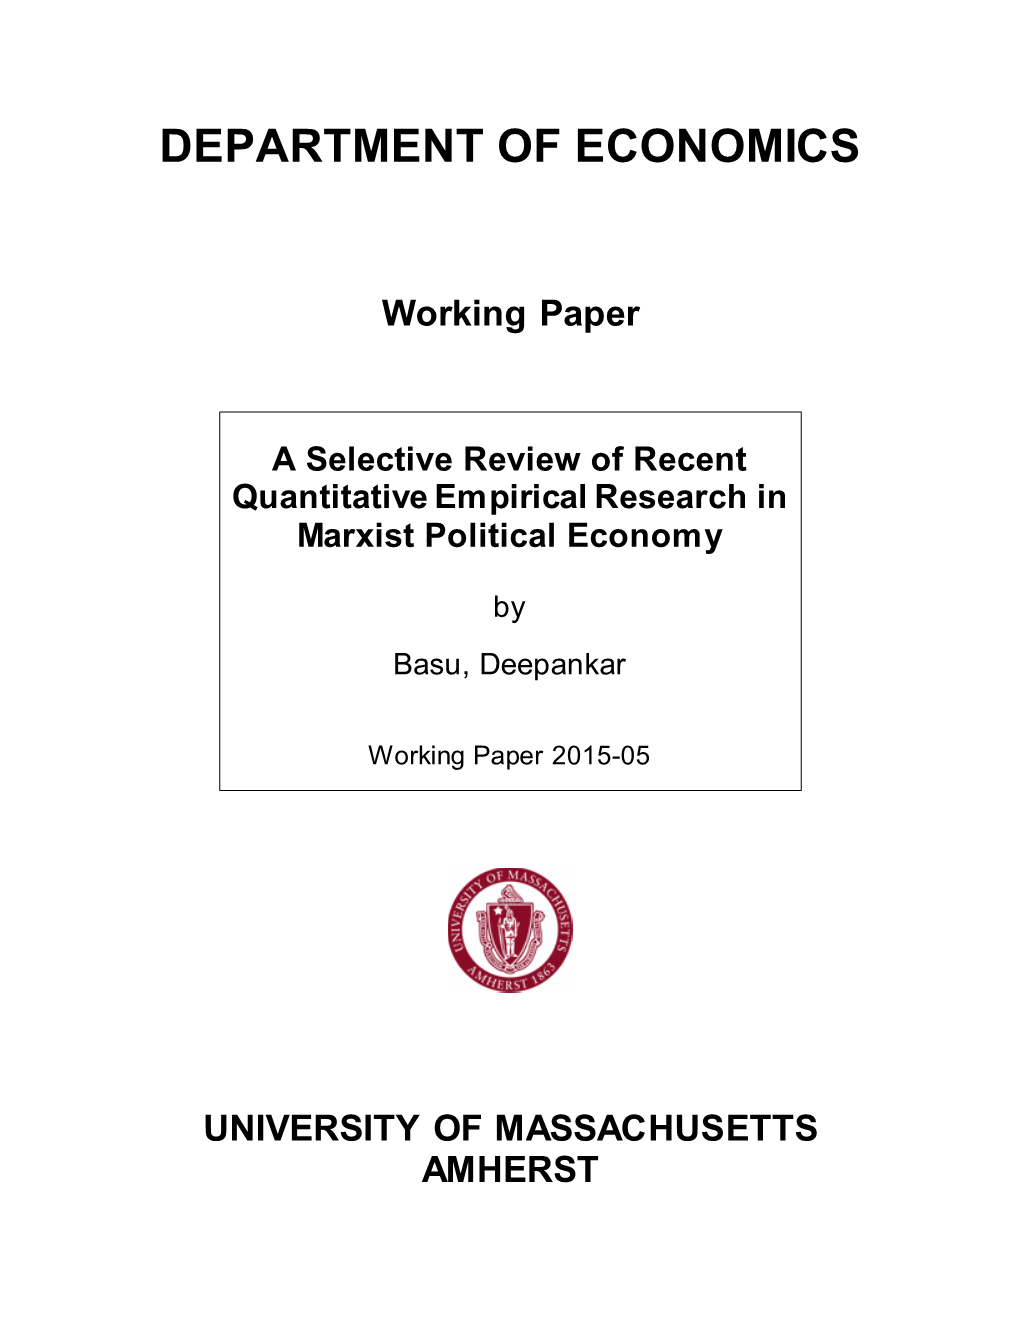 A Selective Review of Recent Quantitative Empirical Research in Marxist Political Economy